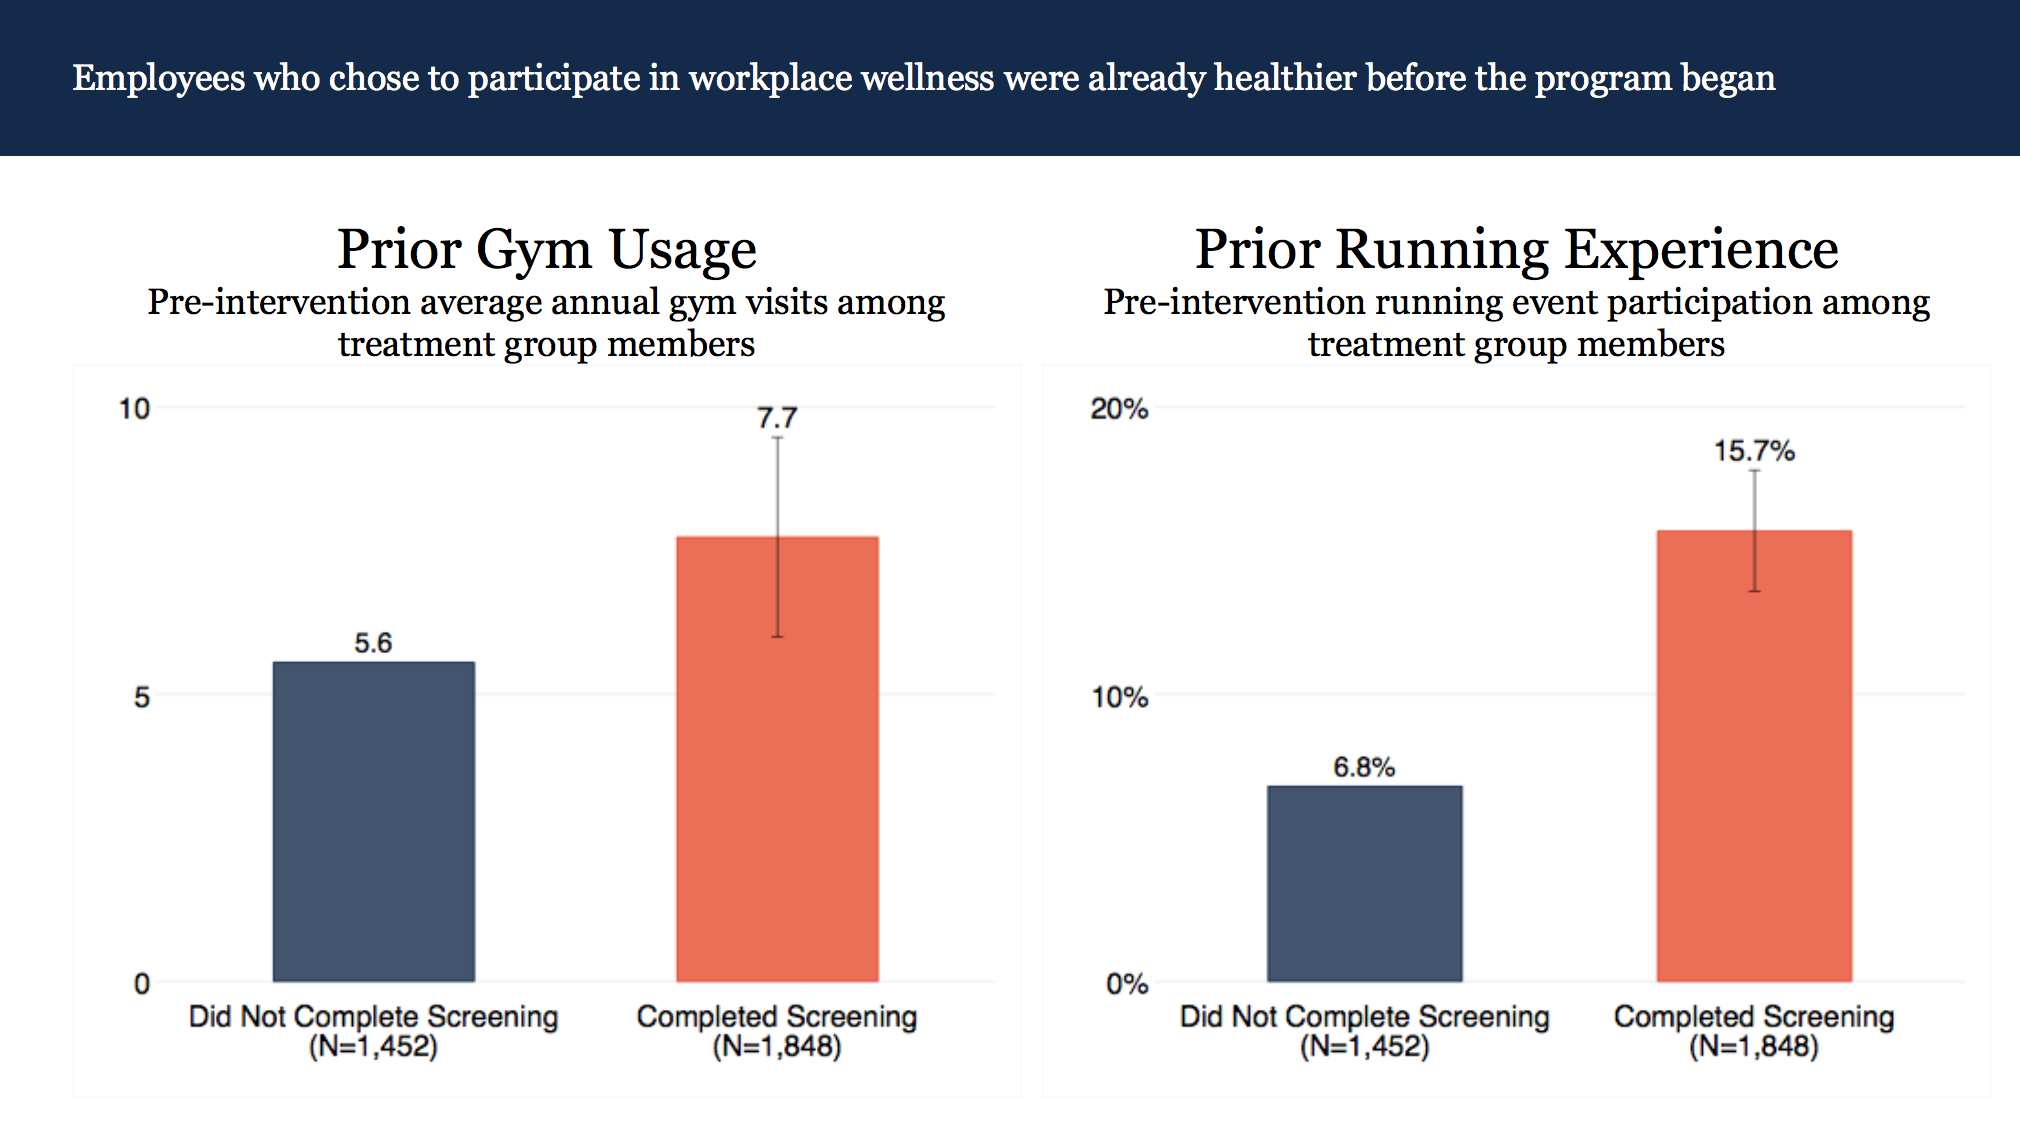 AVERAGE HEALTHCARE SPENDERS MORE LIKELY TO PARTICIPATE IN WELLNESS PROGRAMS